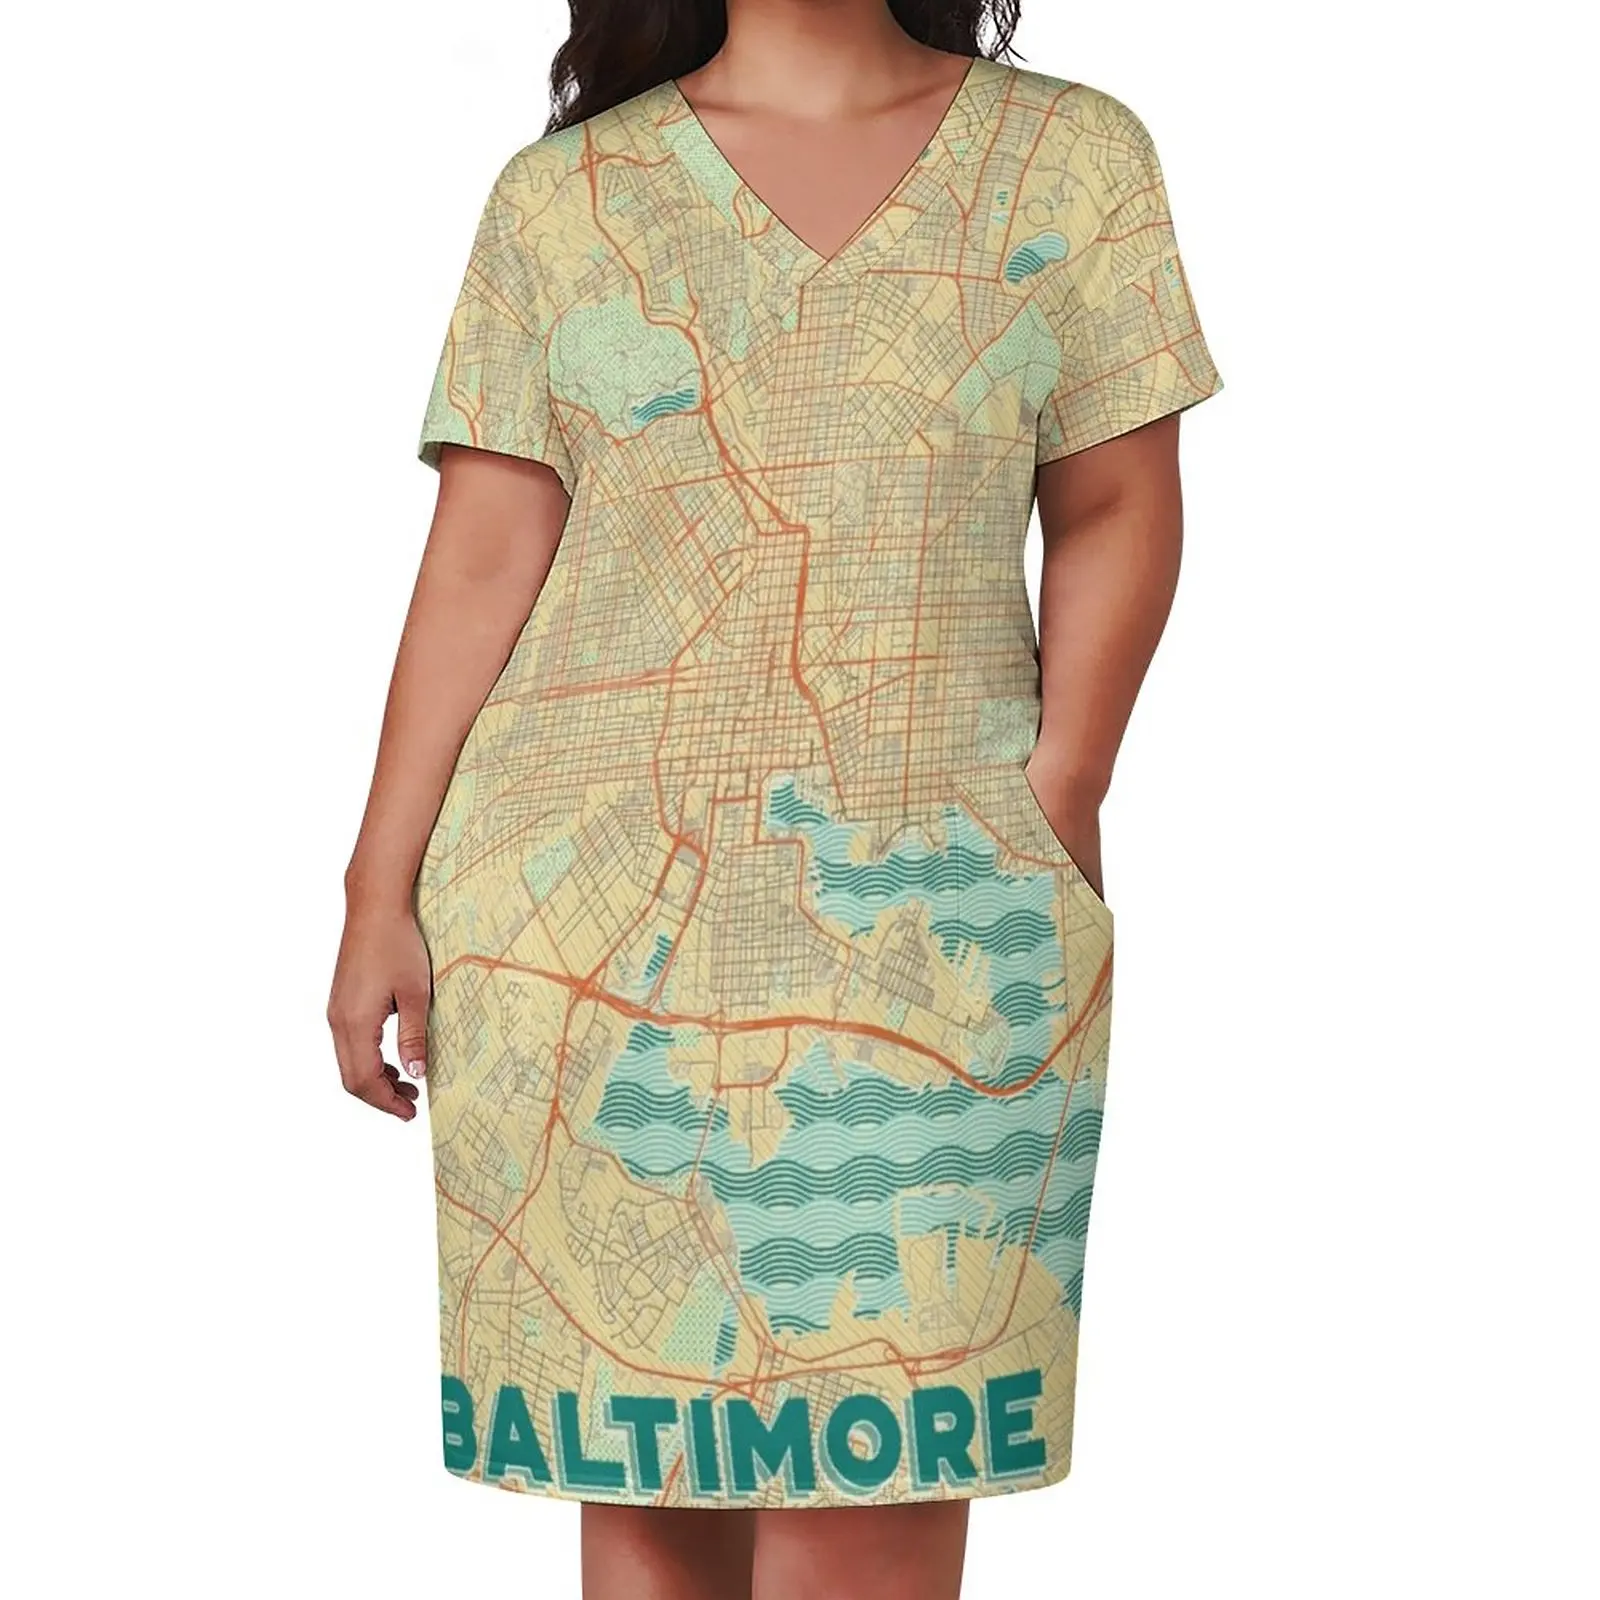 Baltimore Map Casual Dress Summer Vintage Maps Trendy Dresses Female V Neck Printed Street Style Dress Plus Size 3XL 4XL